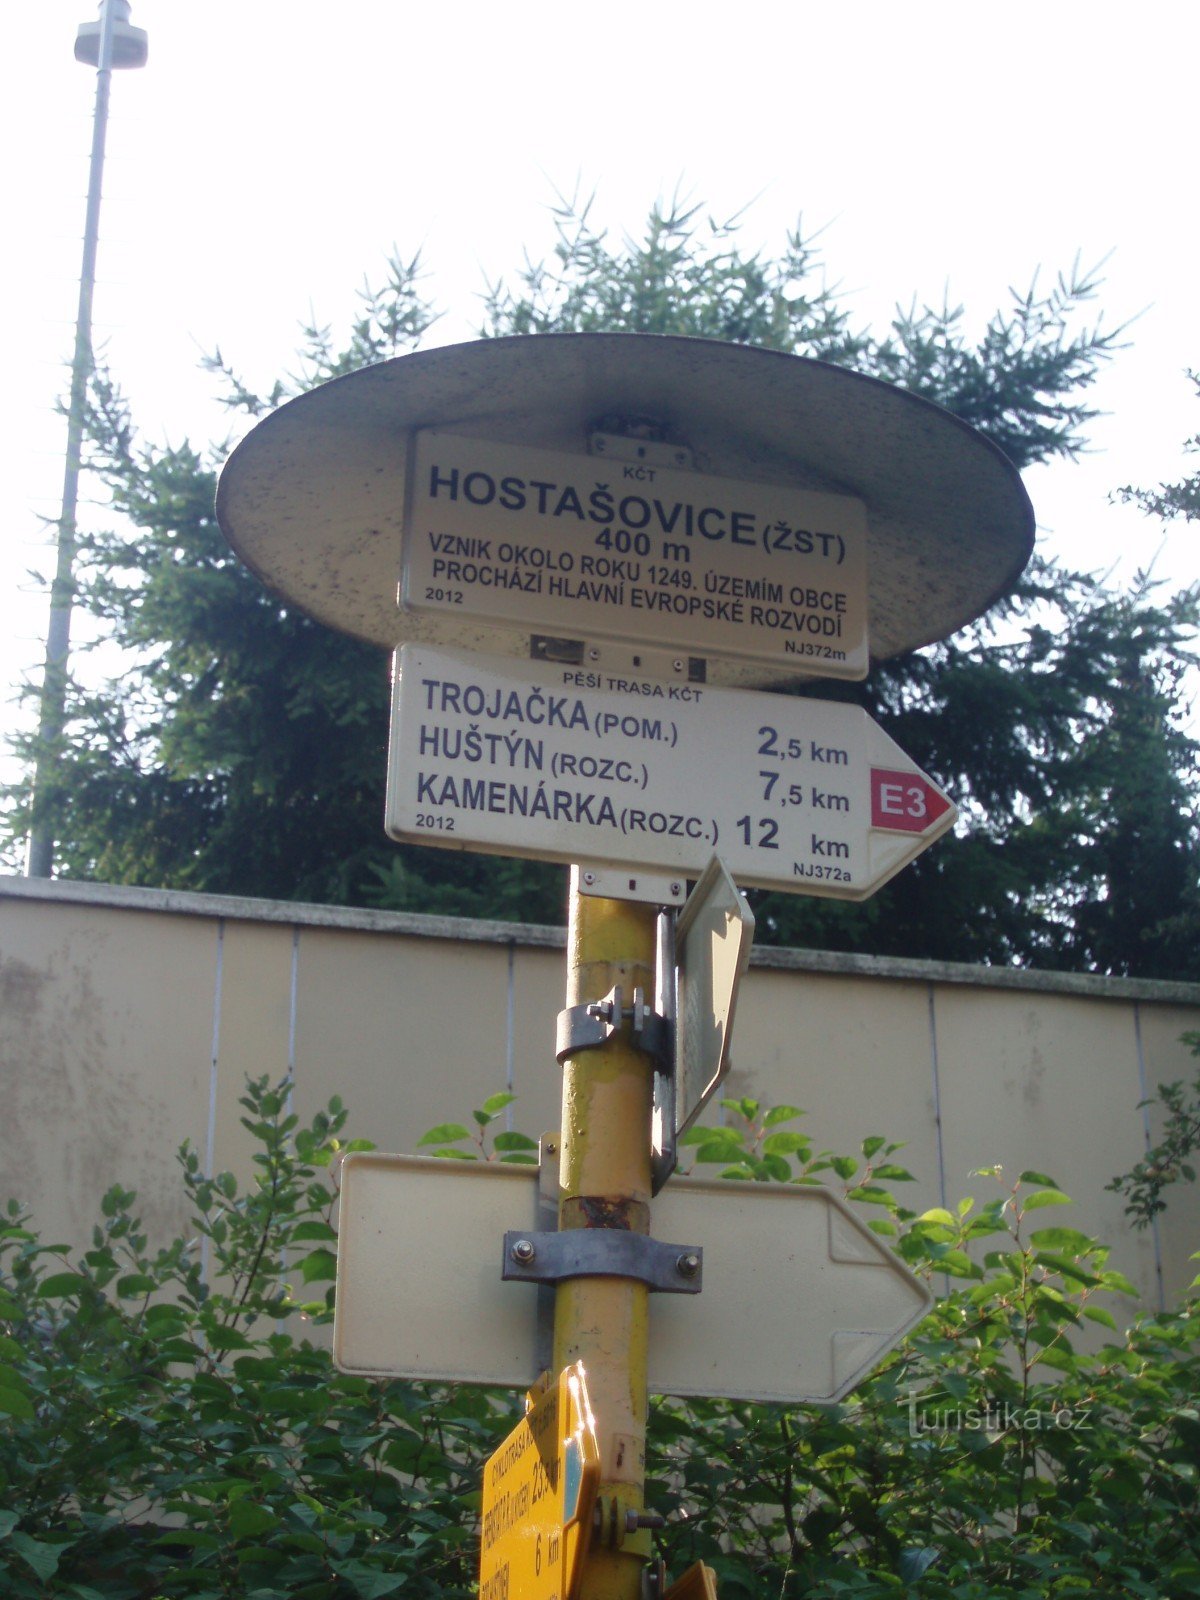 Signpost at the station